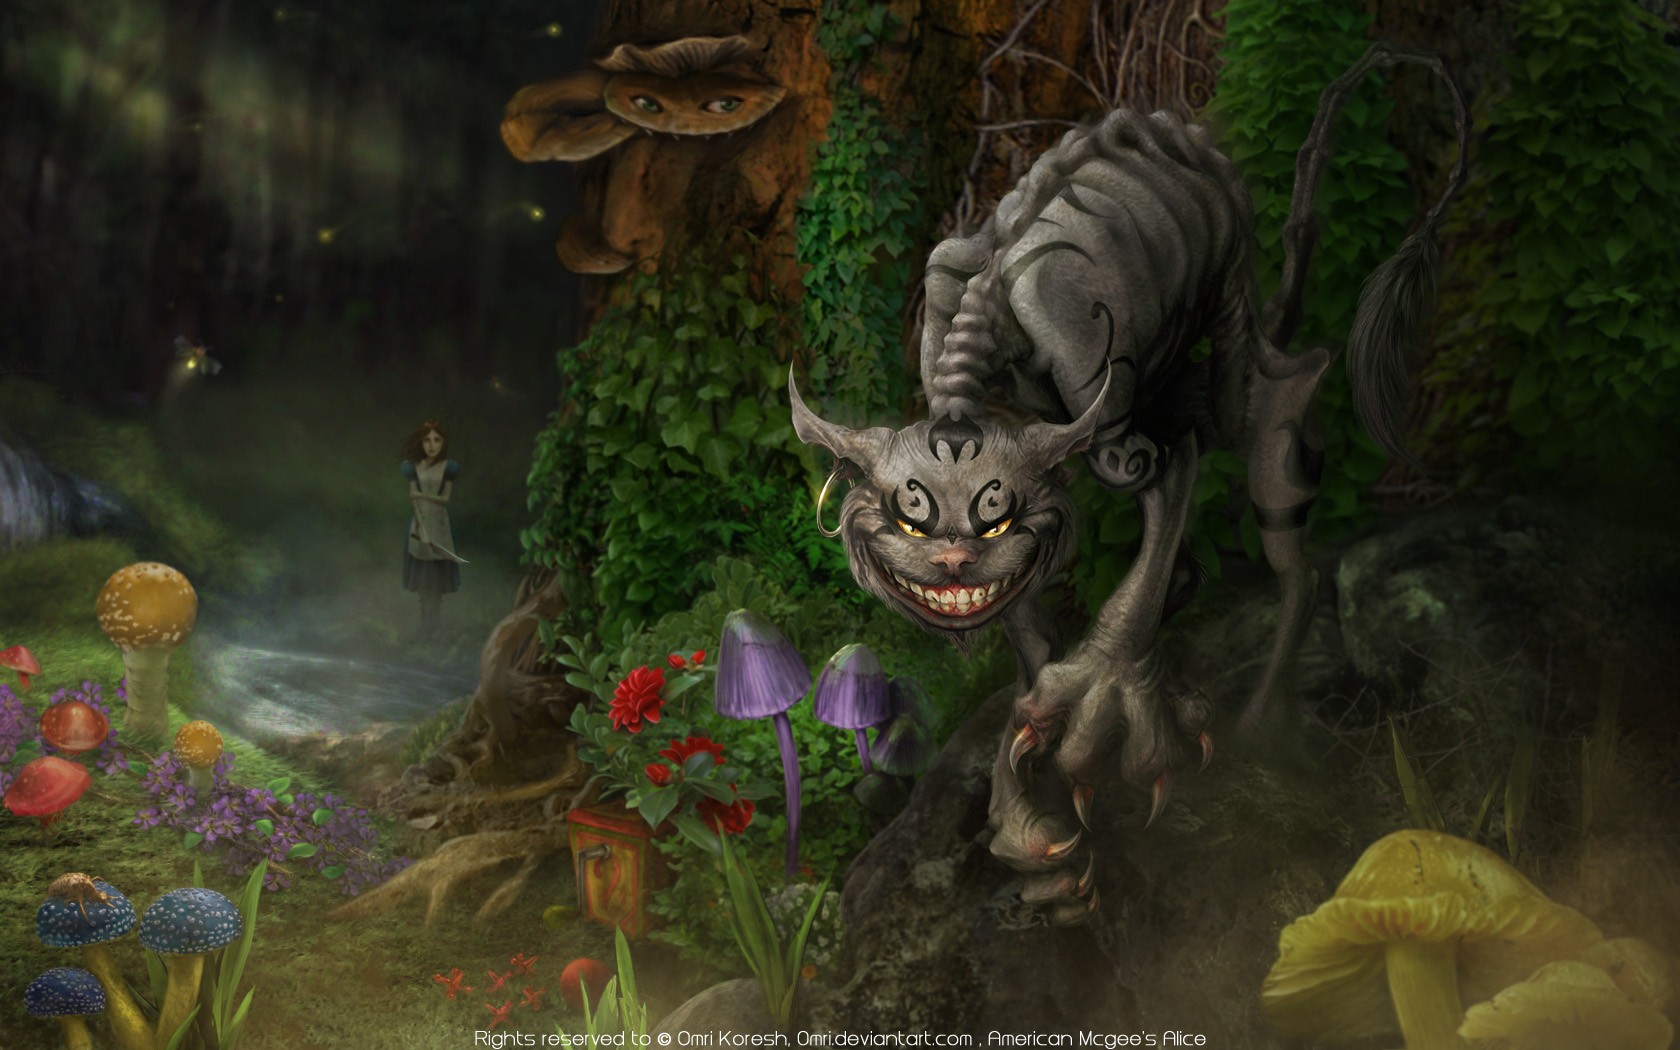 General 1680x1050 American McGee's Alice Alice in Wonderland Cheshire Cat video games video game art